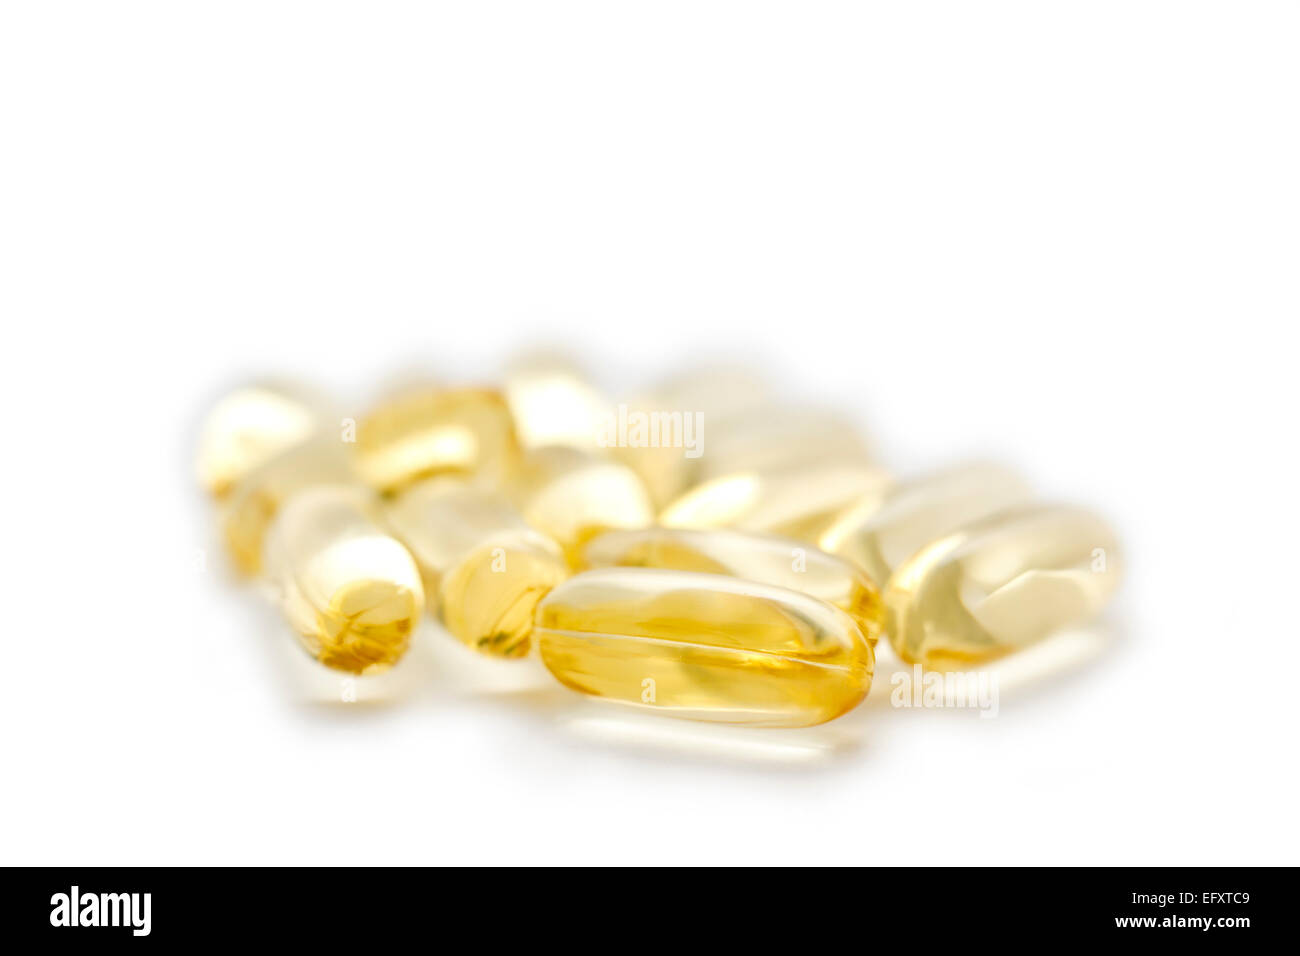 Omega 3 - 6 - 9 Supplements pills on white background. Healthy fatty acids from fish. Stock Photo